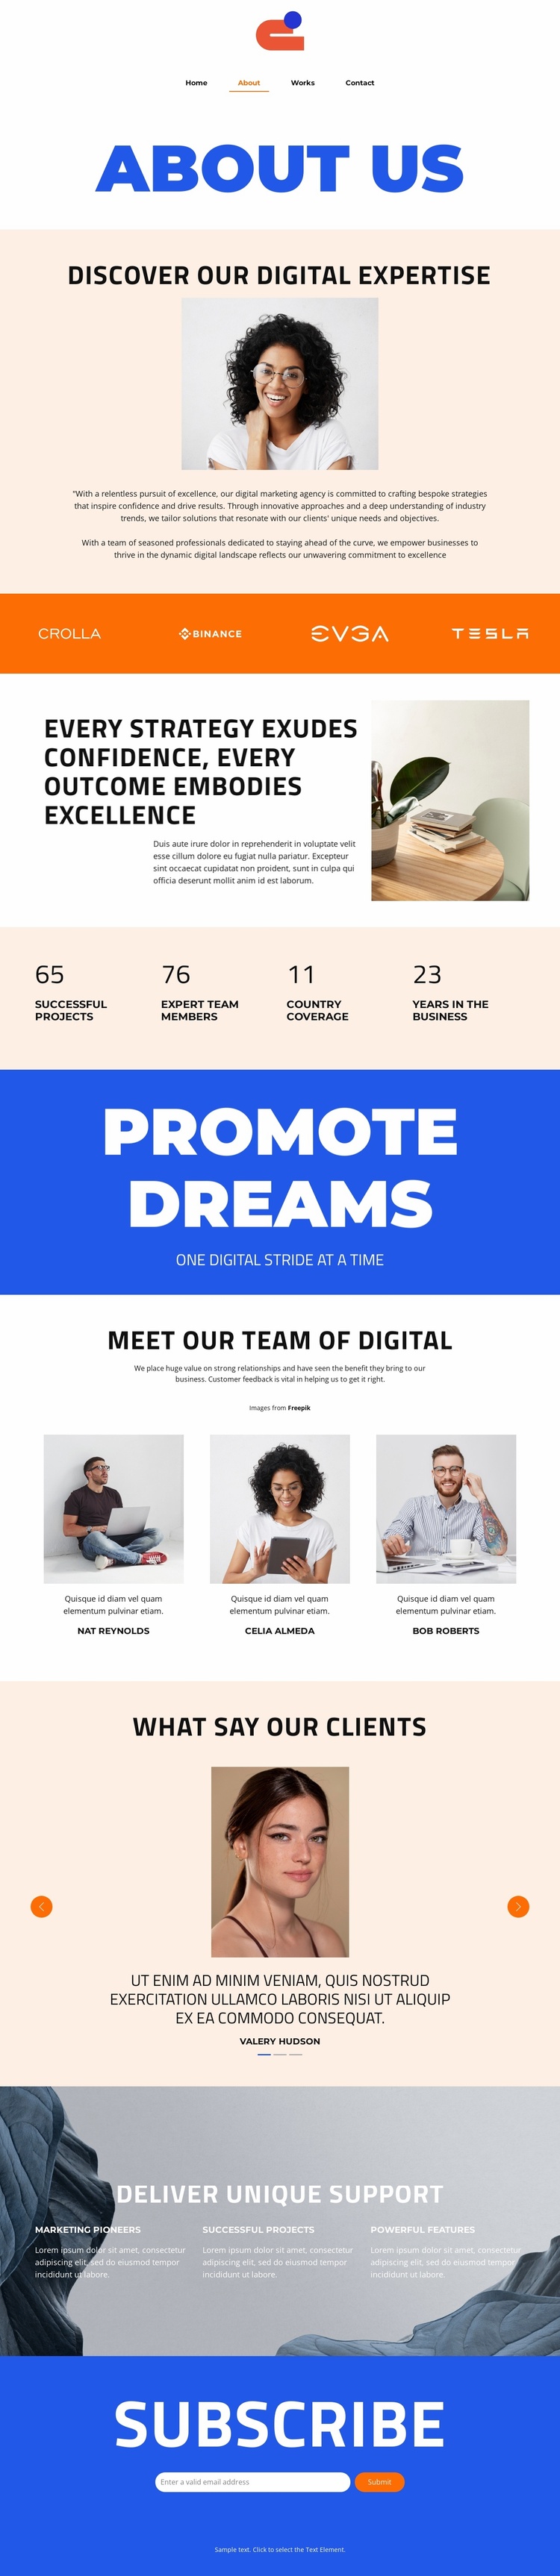 One digital stride at a time Website Template